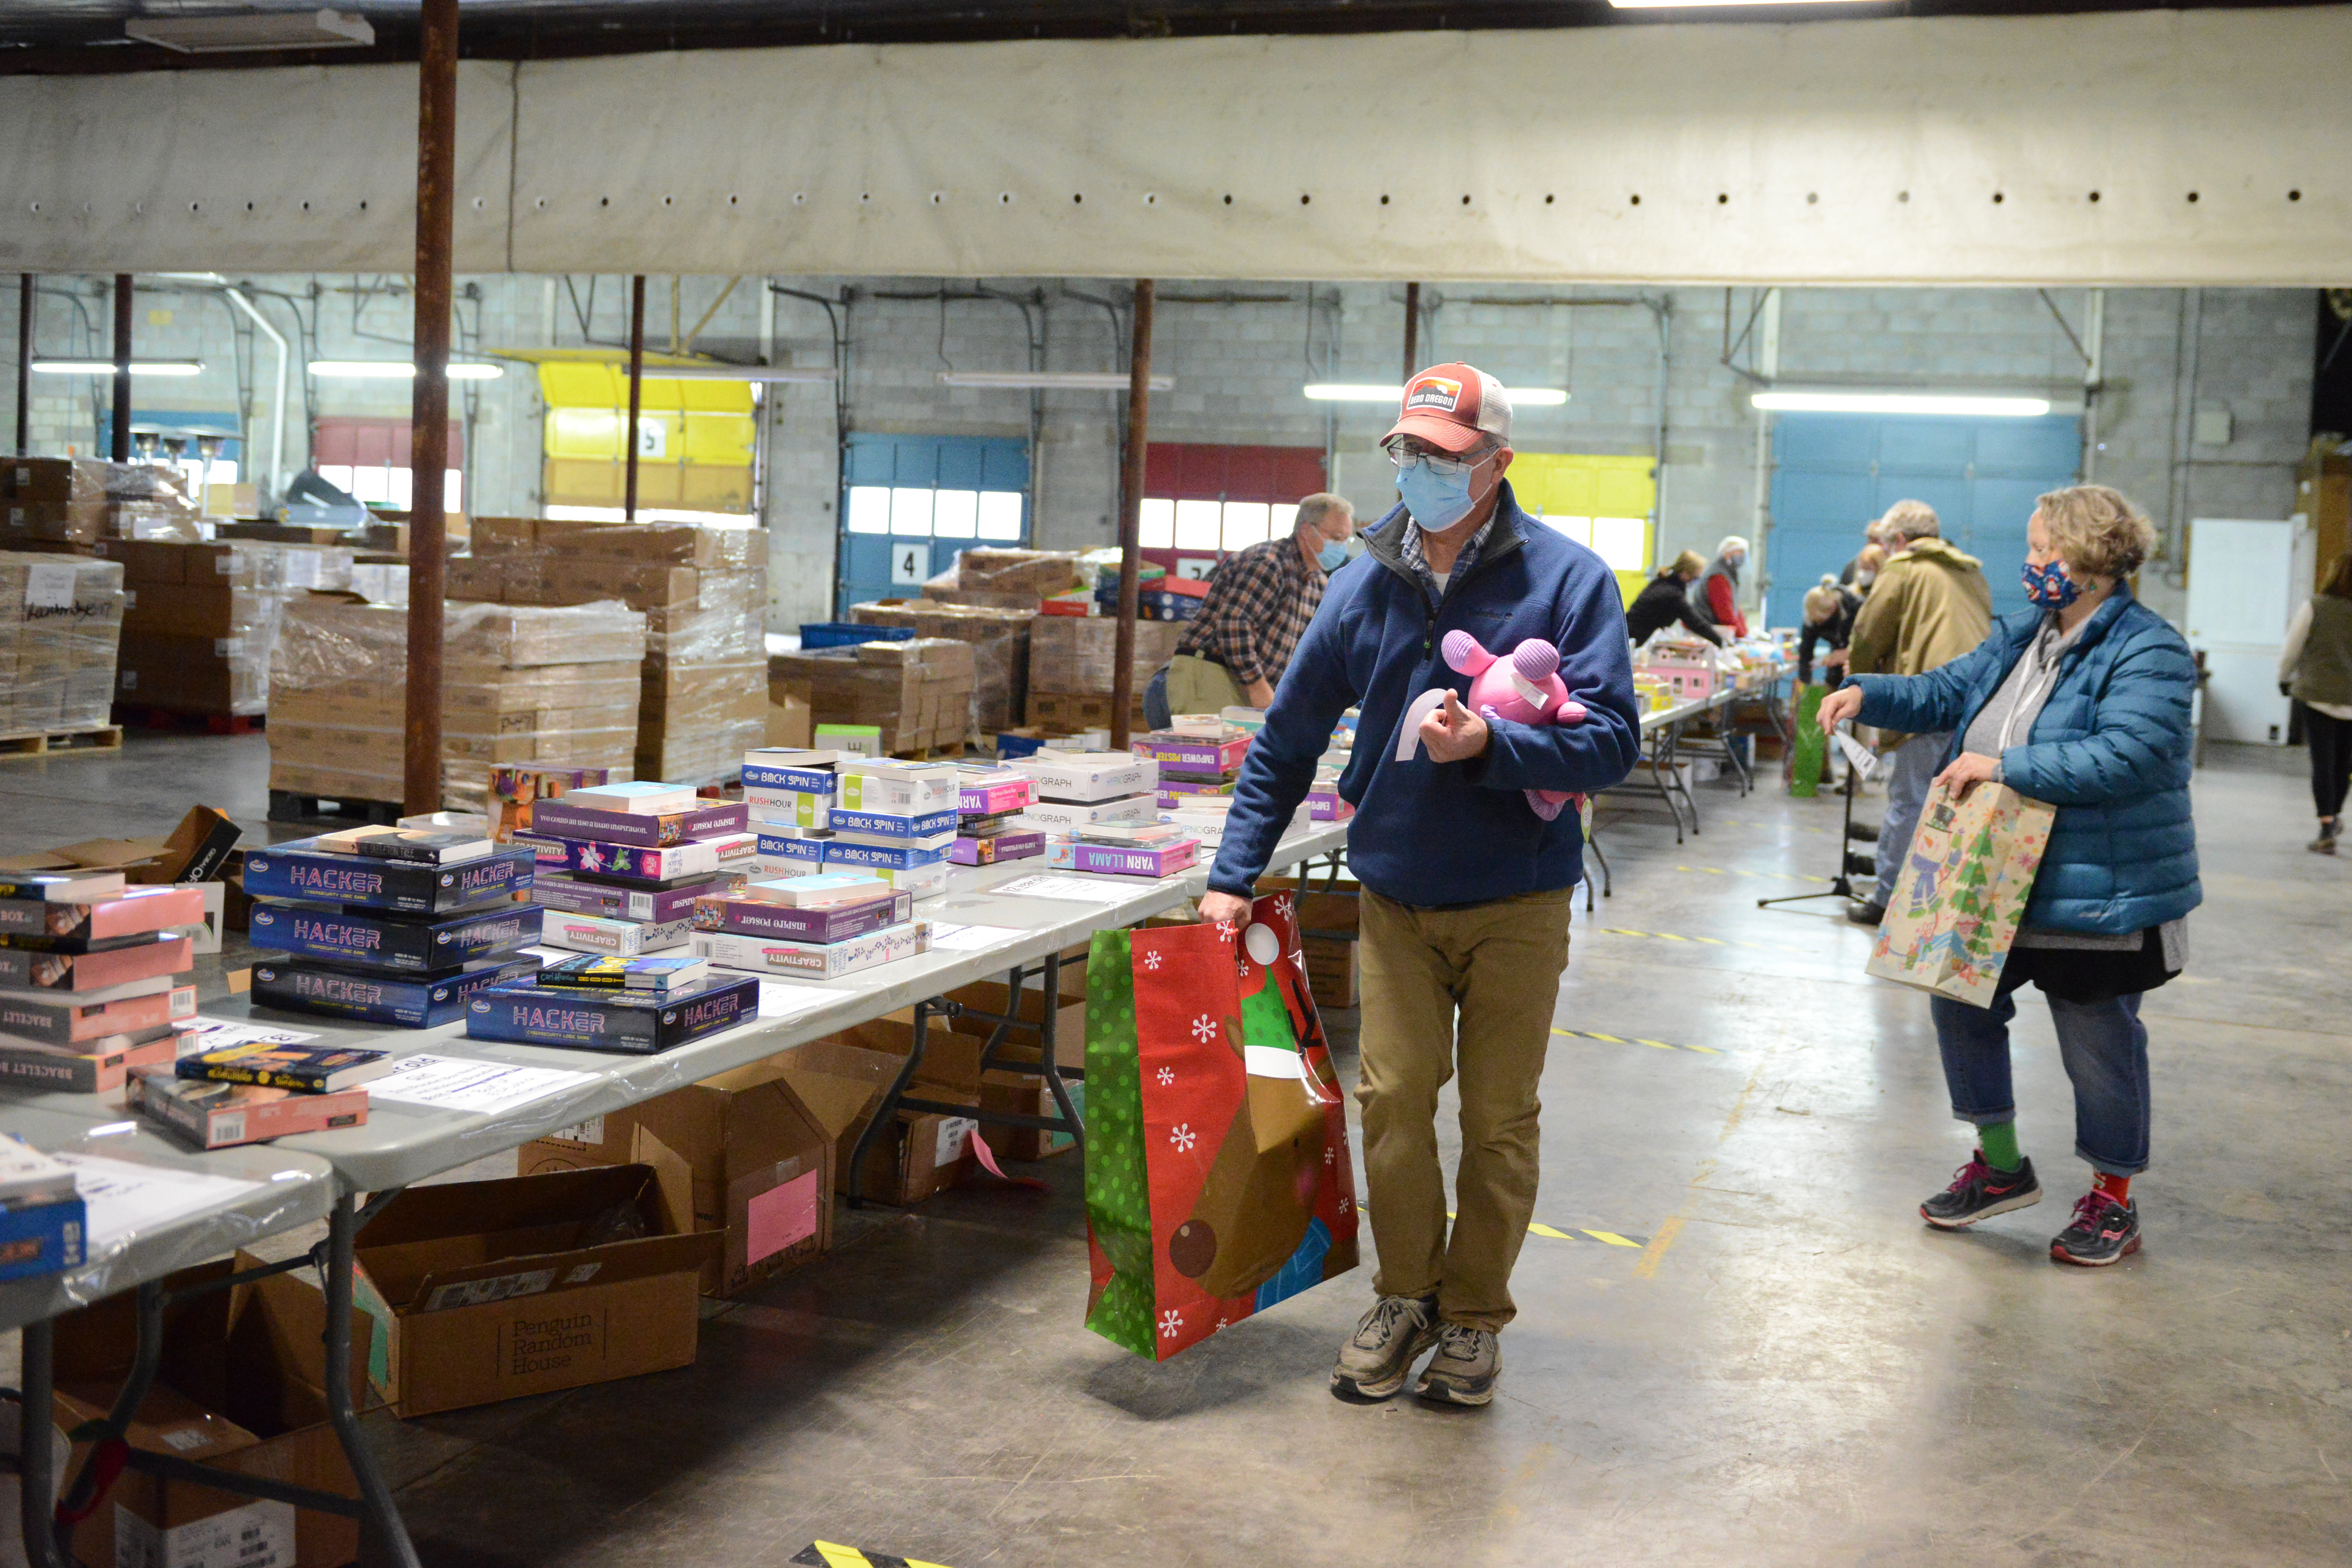 Adult male volunteer in the foreground, with pink stuffed animal in one arm, and a large Christmas gift bag with a reindeer in the other. Tracy Bonds, in the background, also packing toys into gift bags.